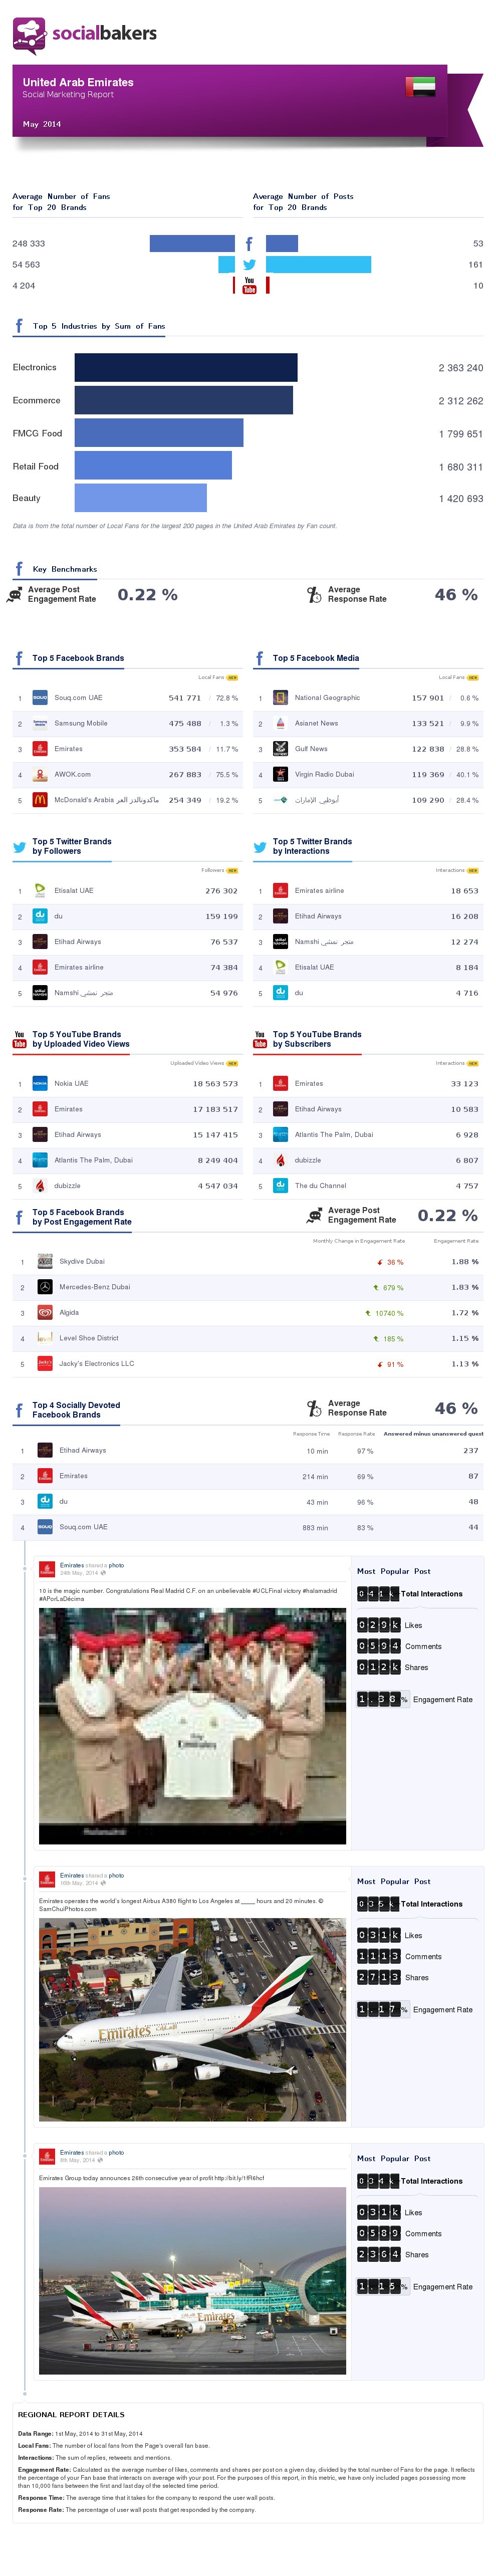 Socialbakers releases UAE social marketing report for May 2014